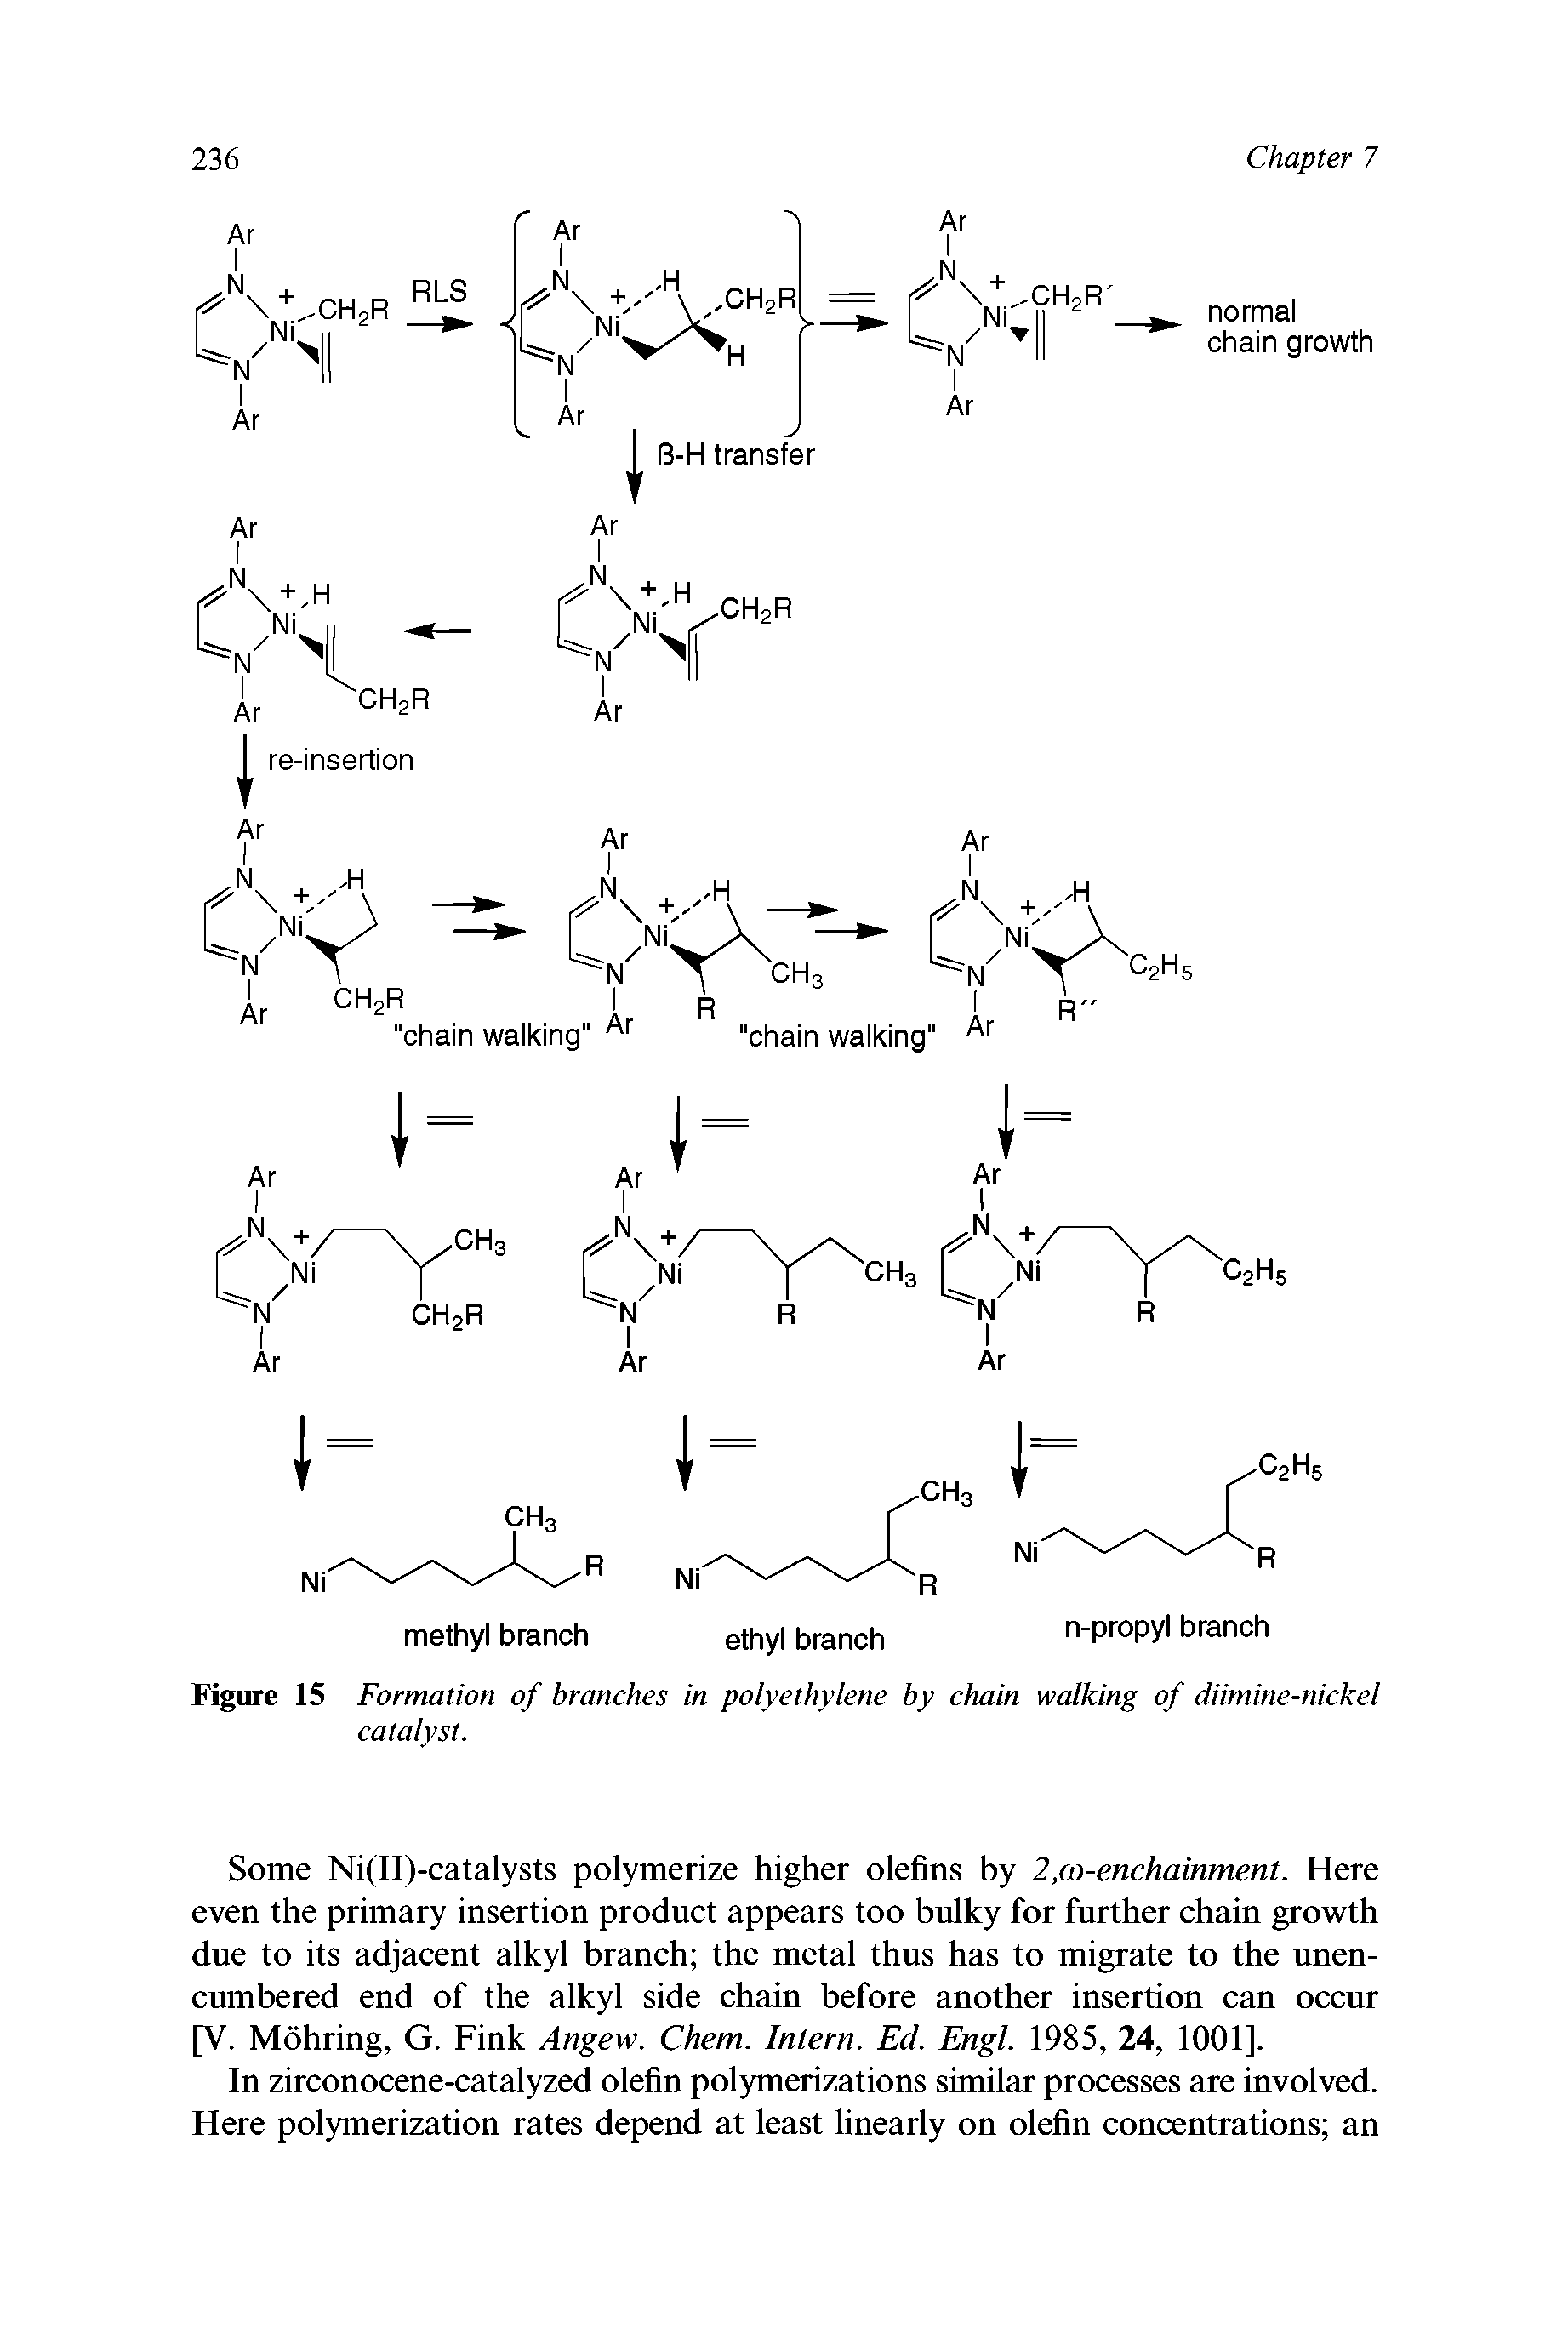 Figure 15 Formation of branches in polyethylene by chain walking of diimine-nickel catalyst.